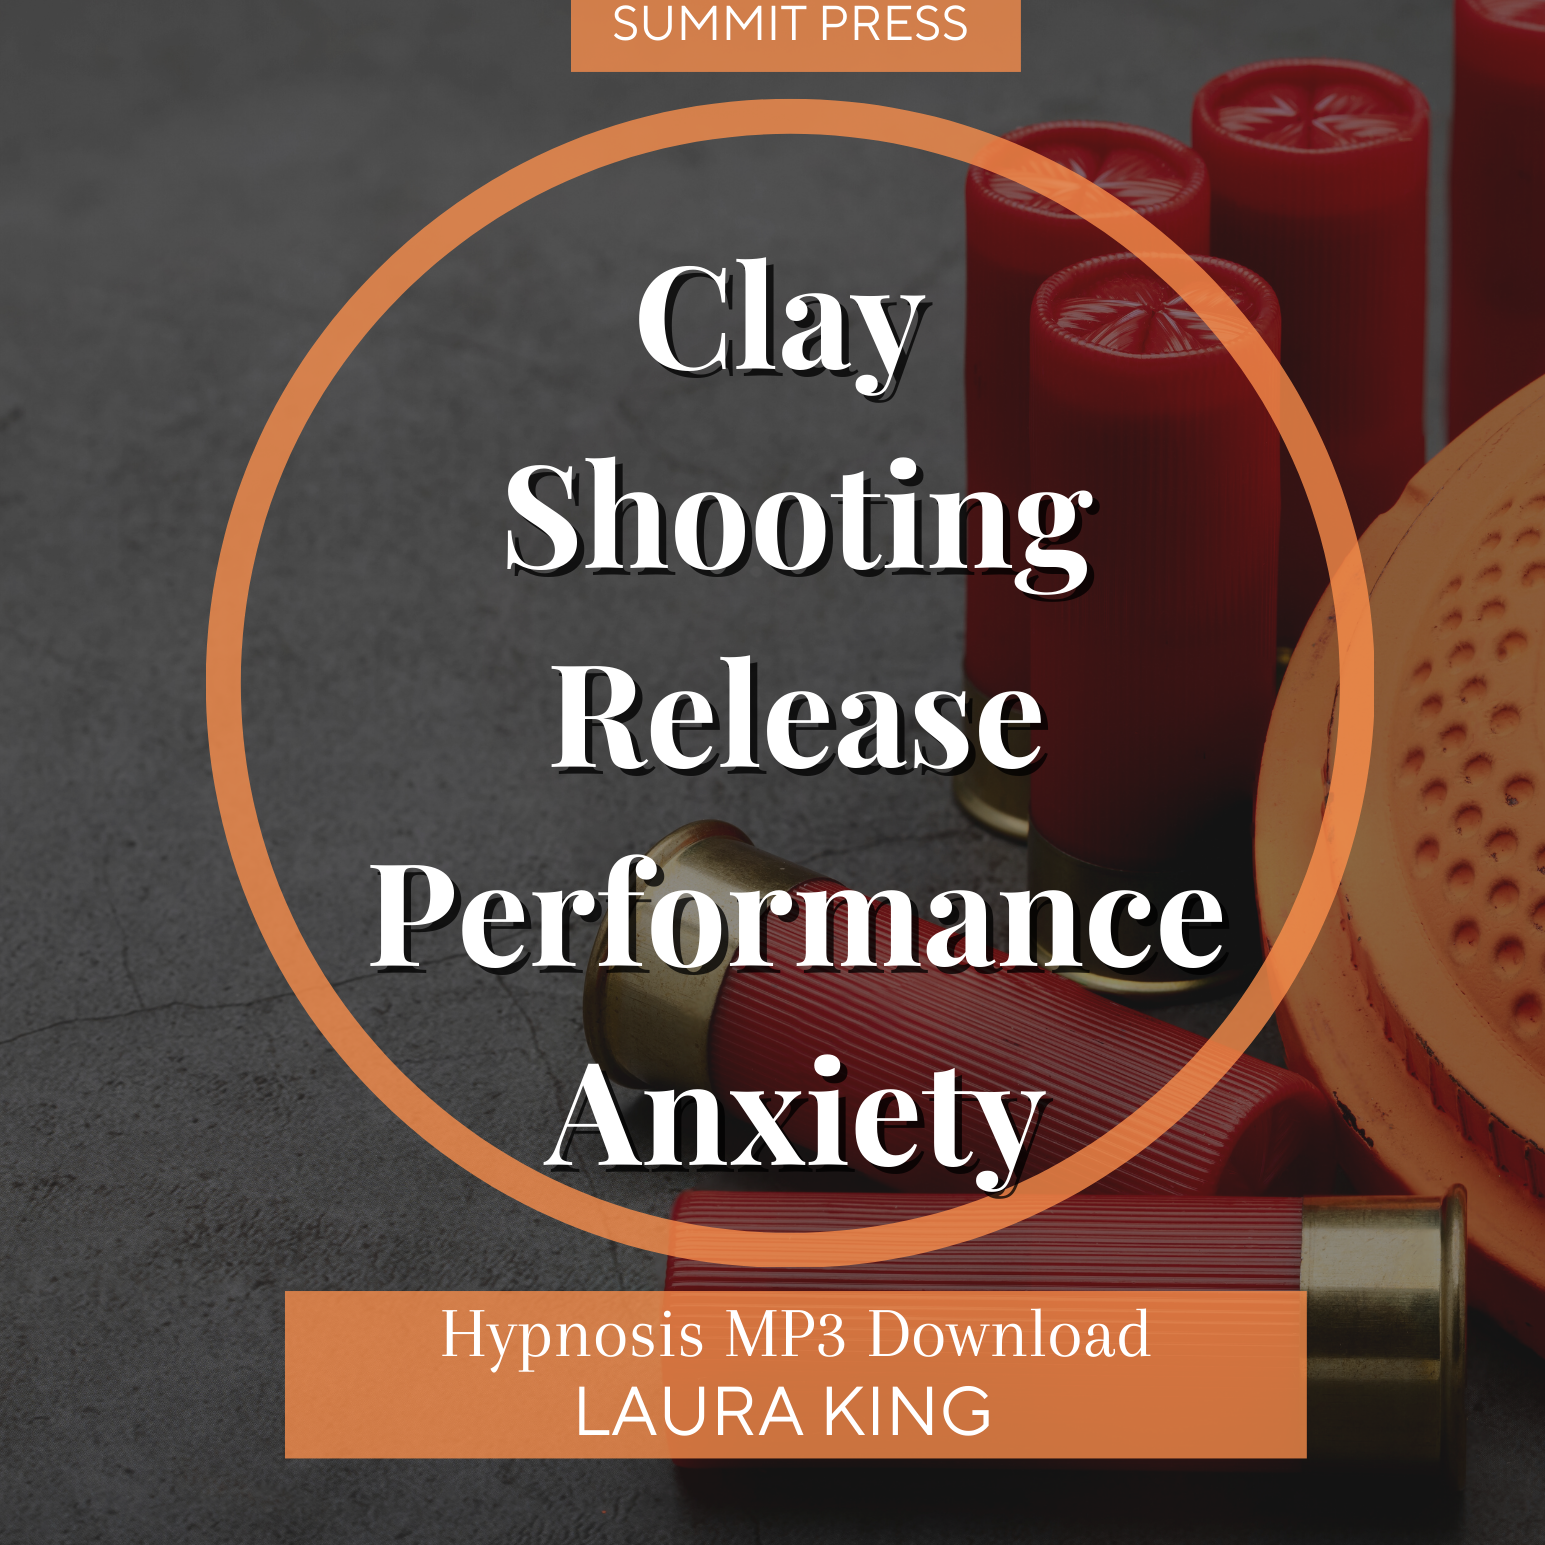 Clay Shooting Release Performance Anxiety